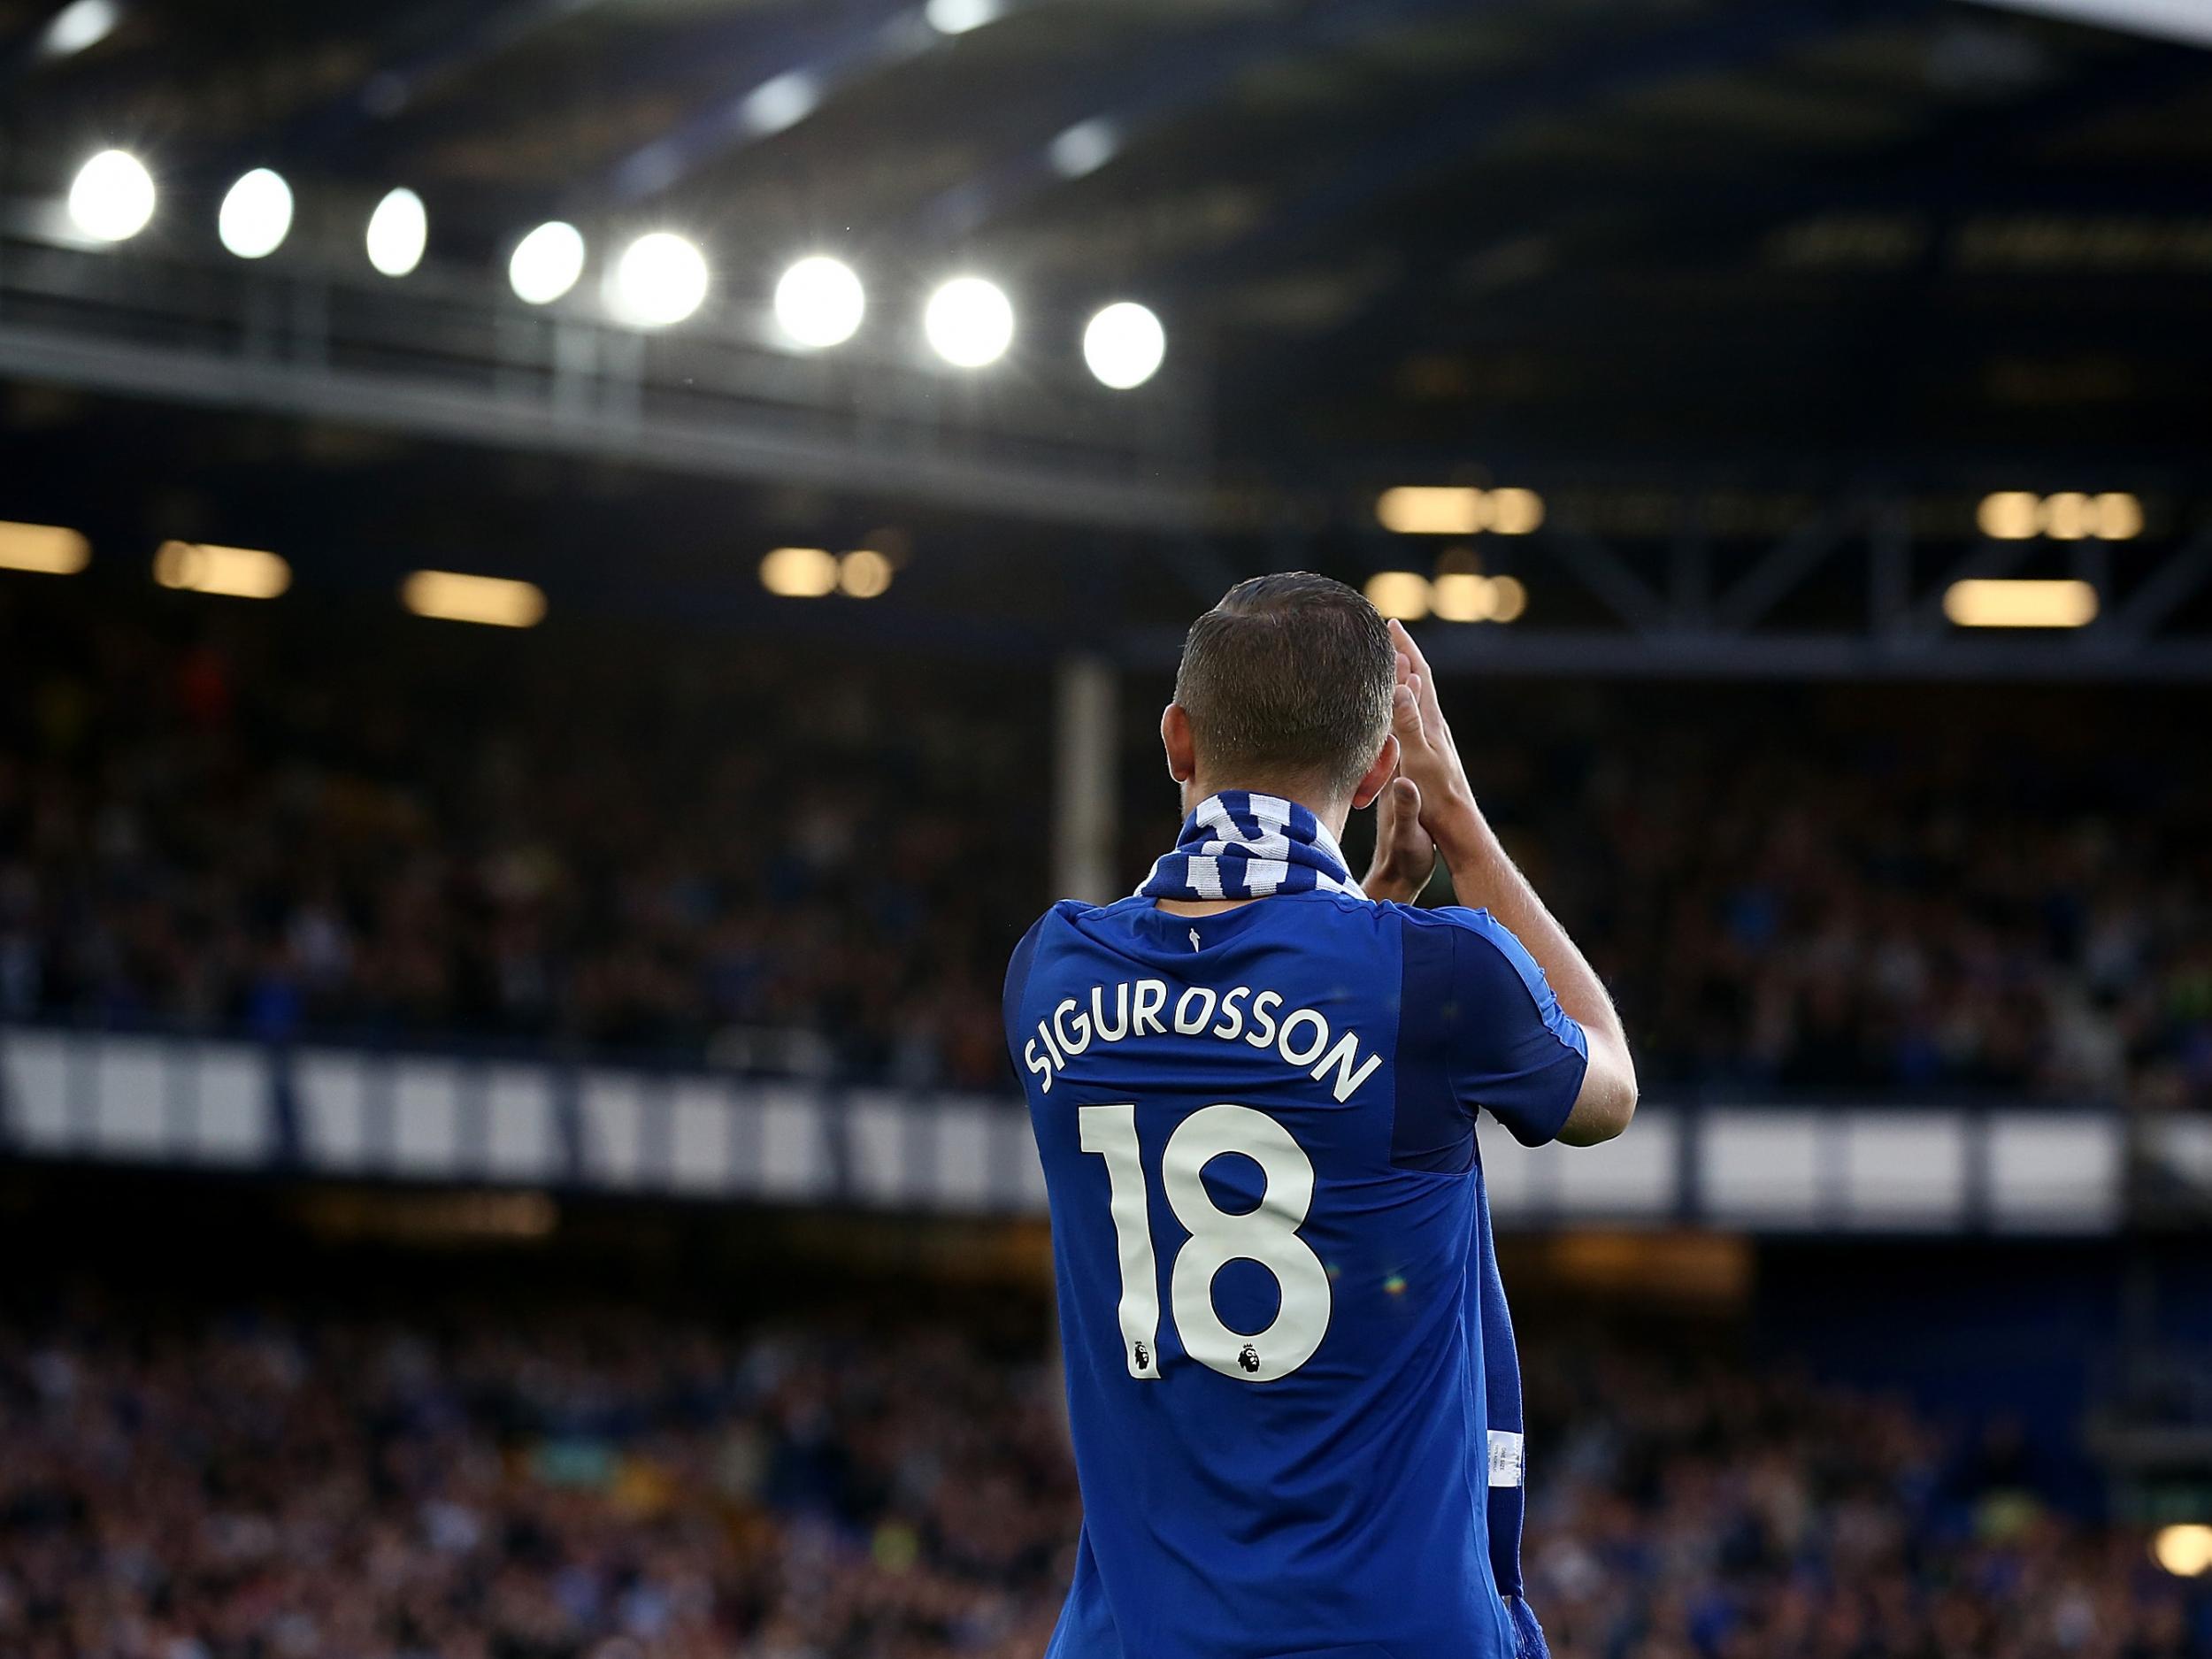 &#13;
New signing Gylfi Sigurdsson was presented to the crowd on Thursday &#13;